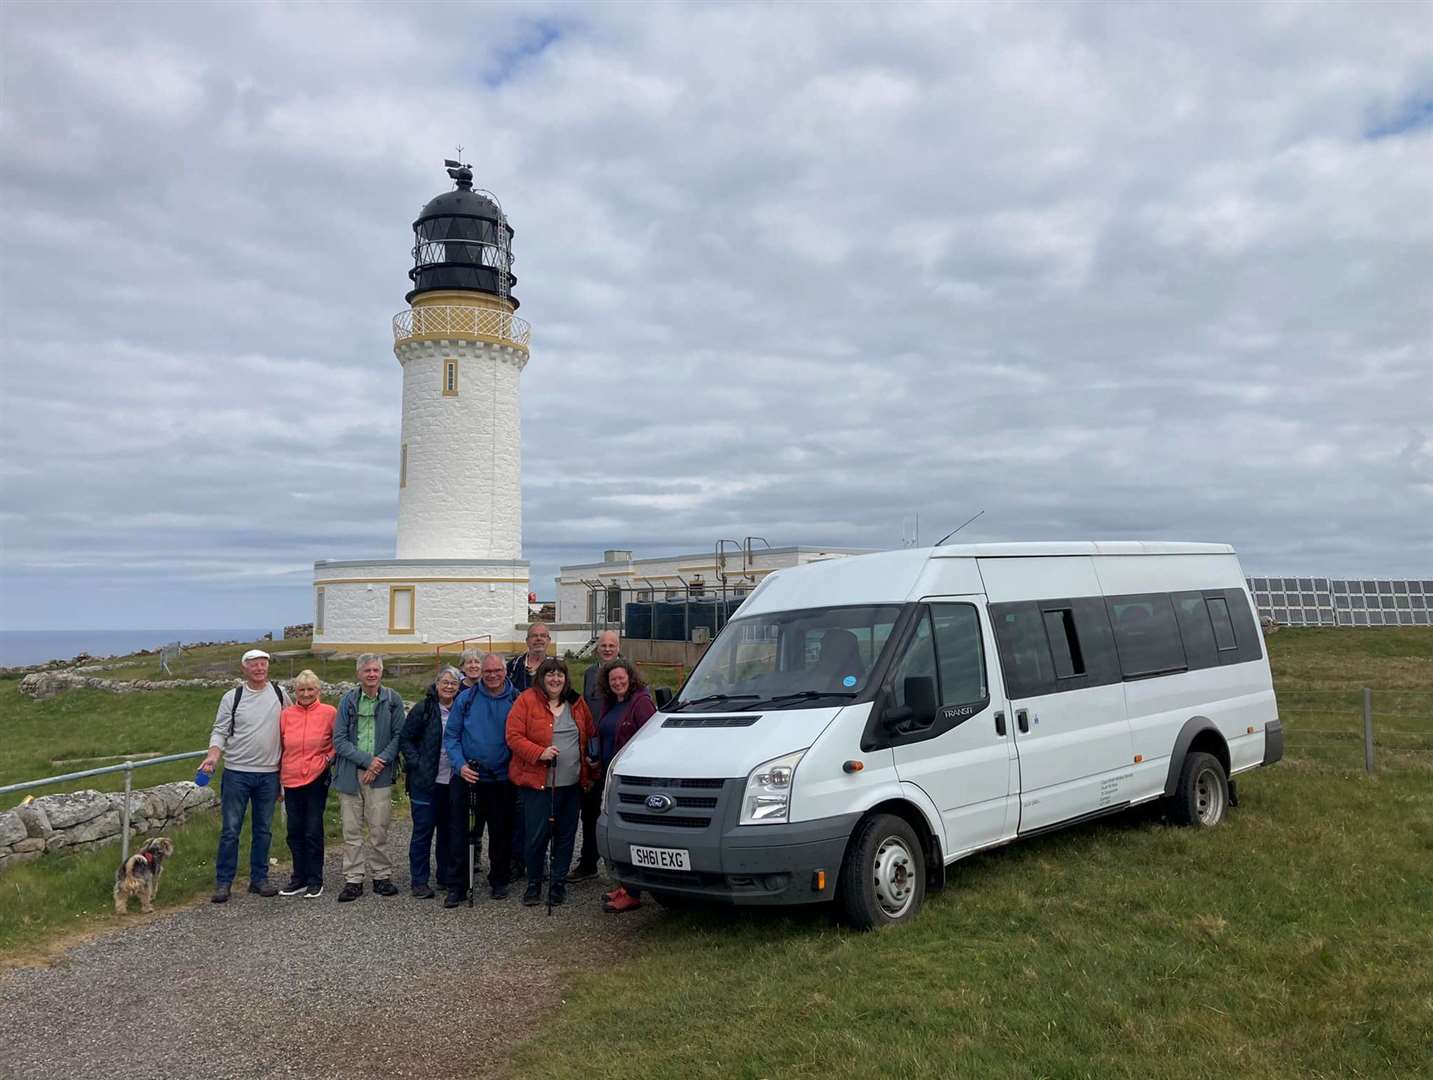 The mini-bus service takes visitors to Cape Wrath lighthouse.